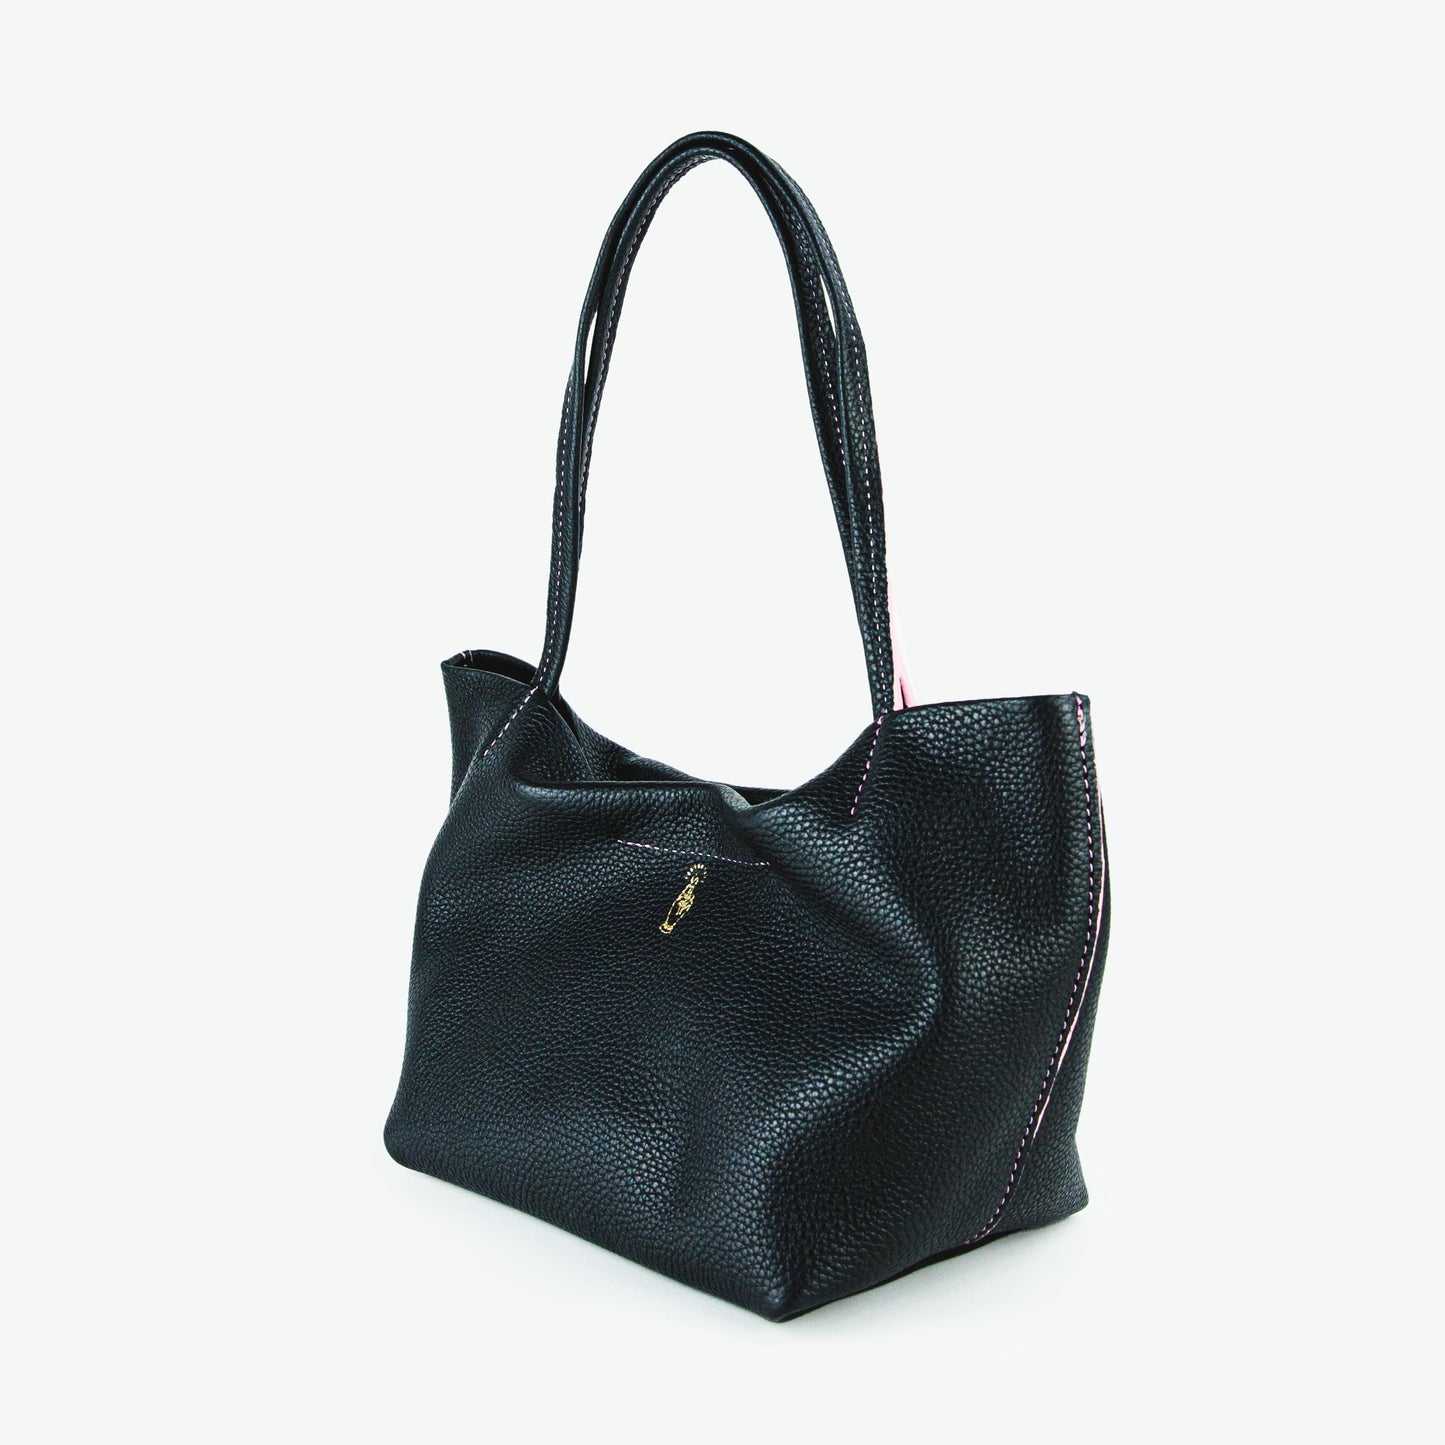 Carly Tote - Pebbled Licorice